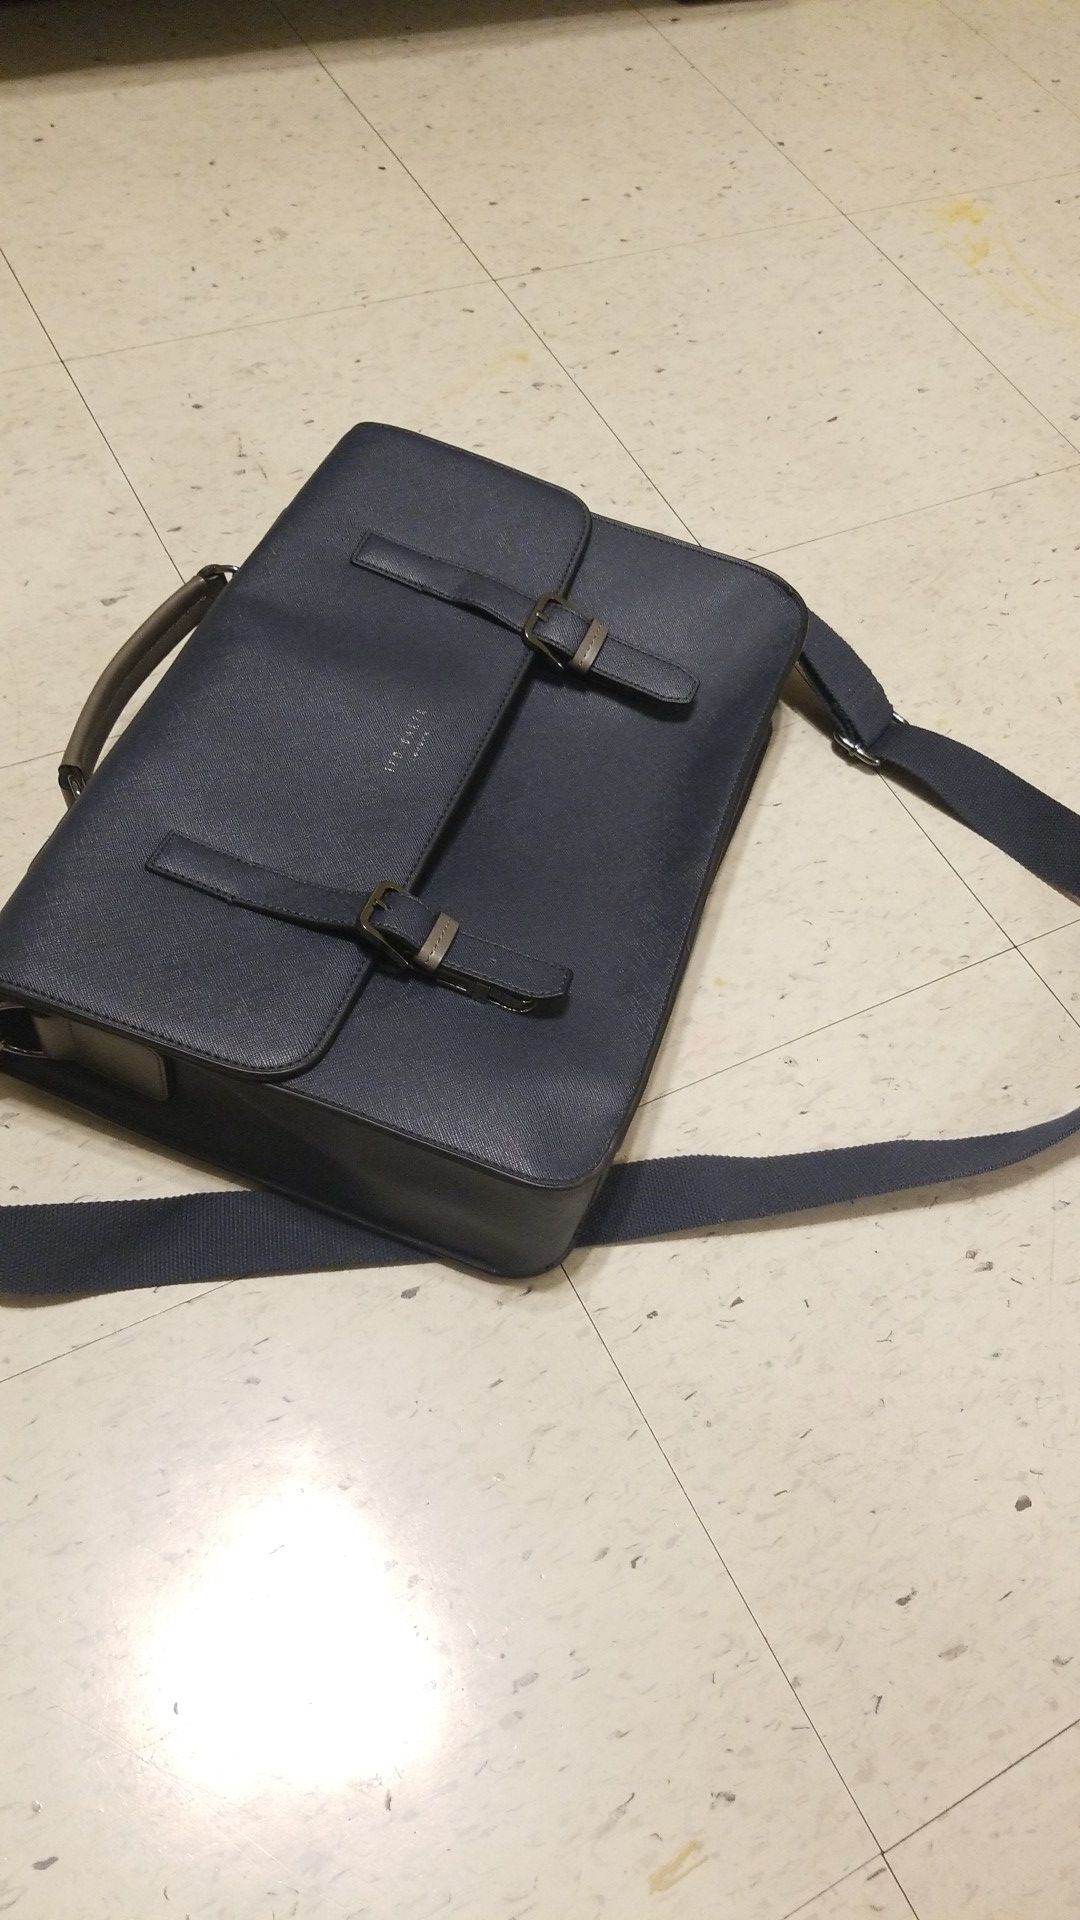 Work Bag, Rarely Used: Ted Baker